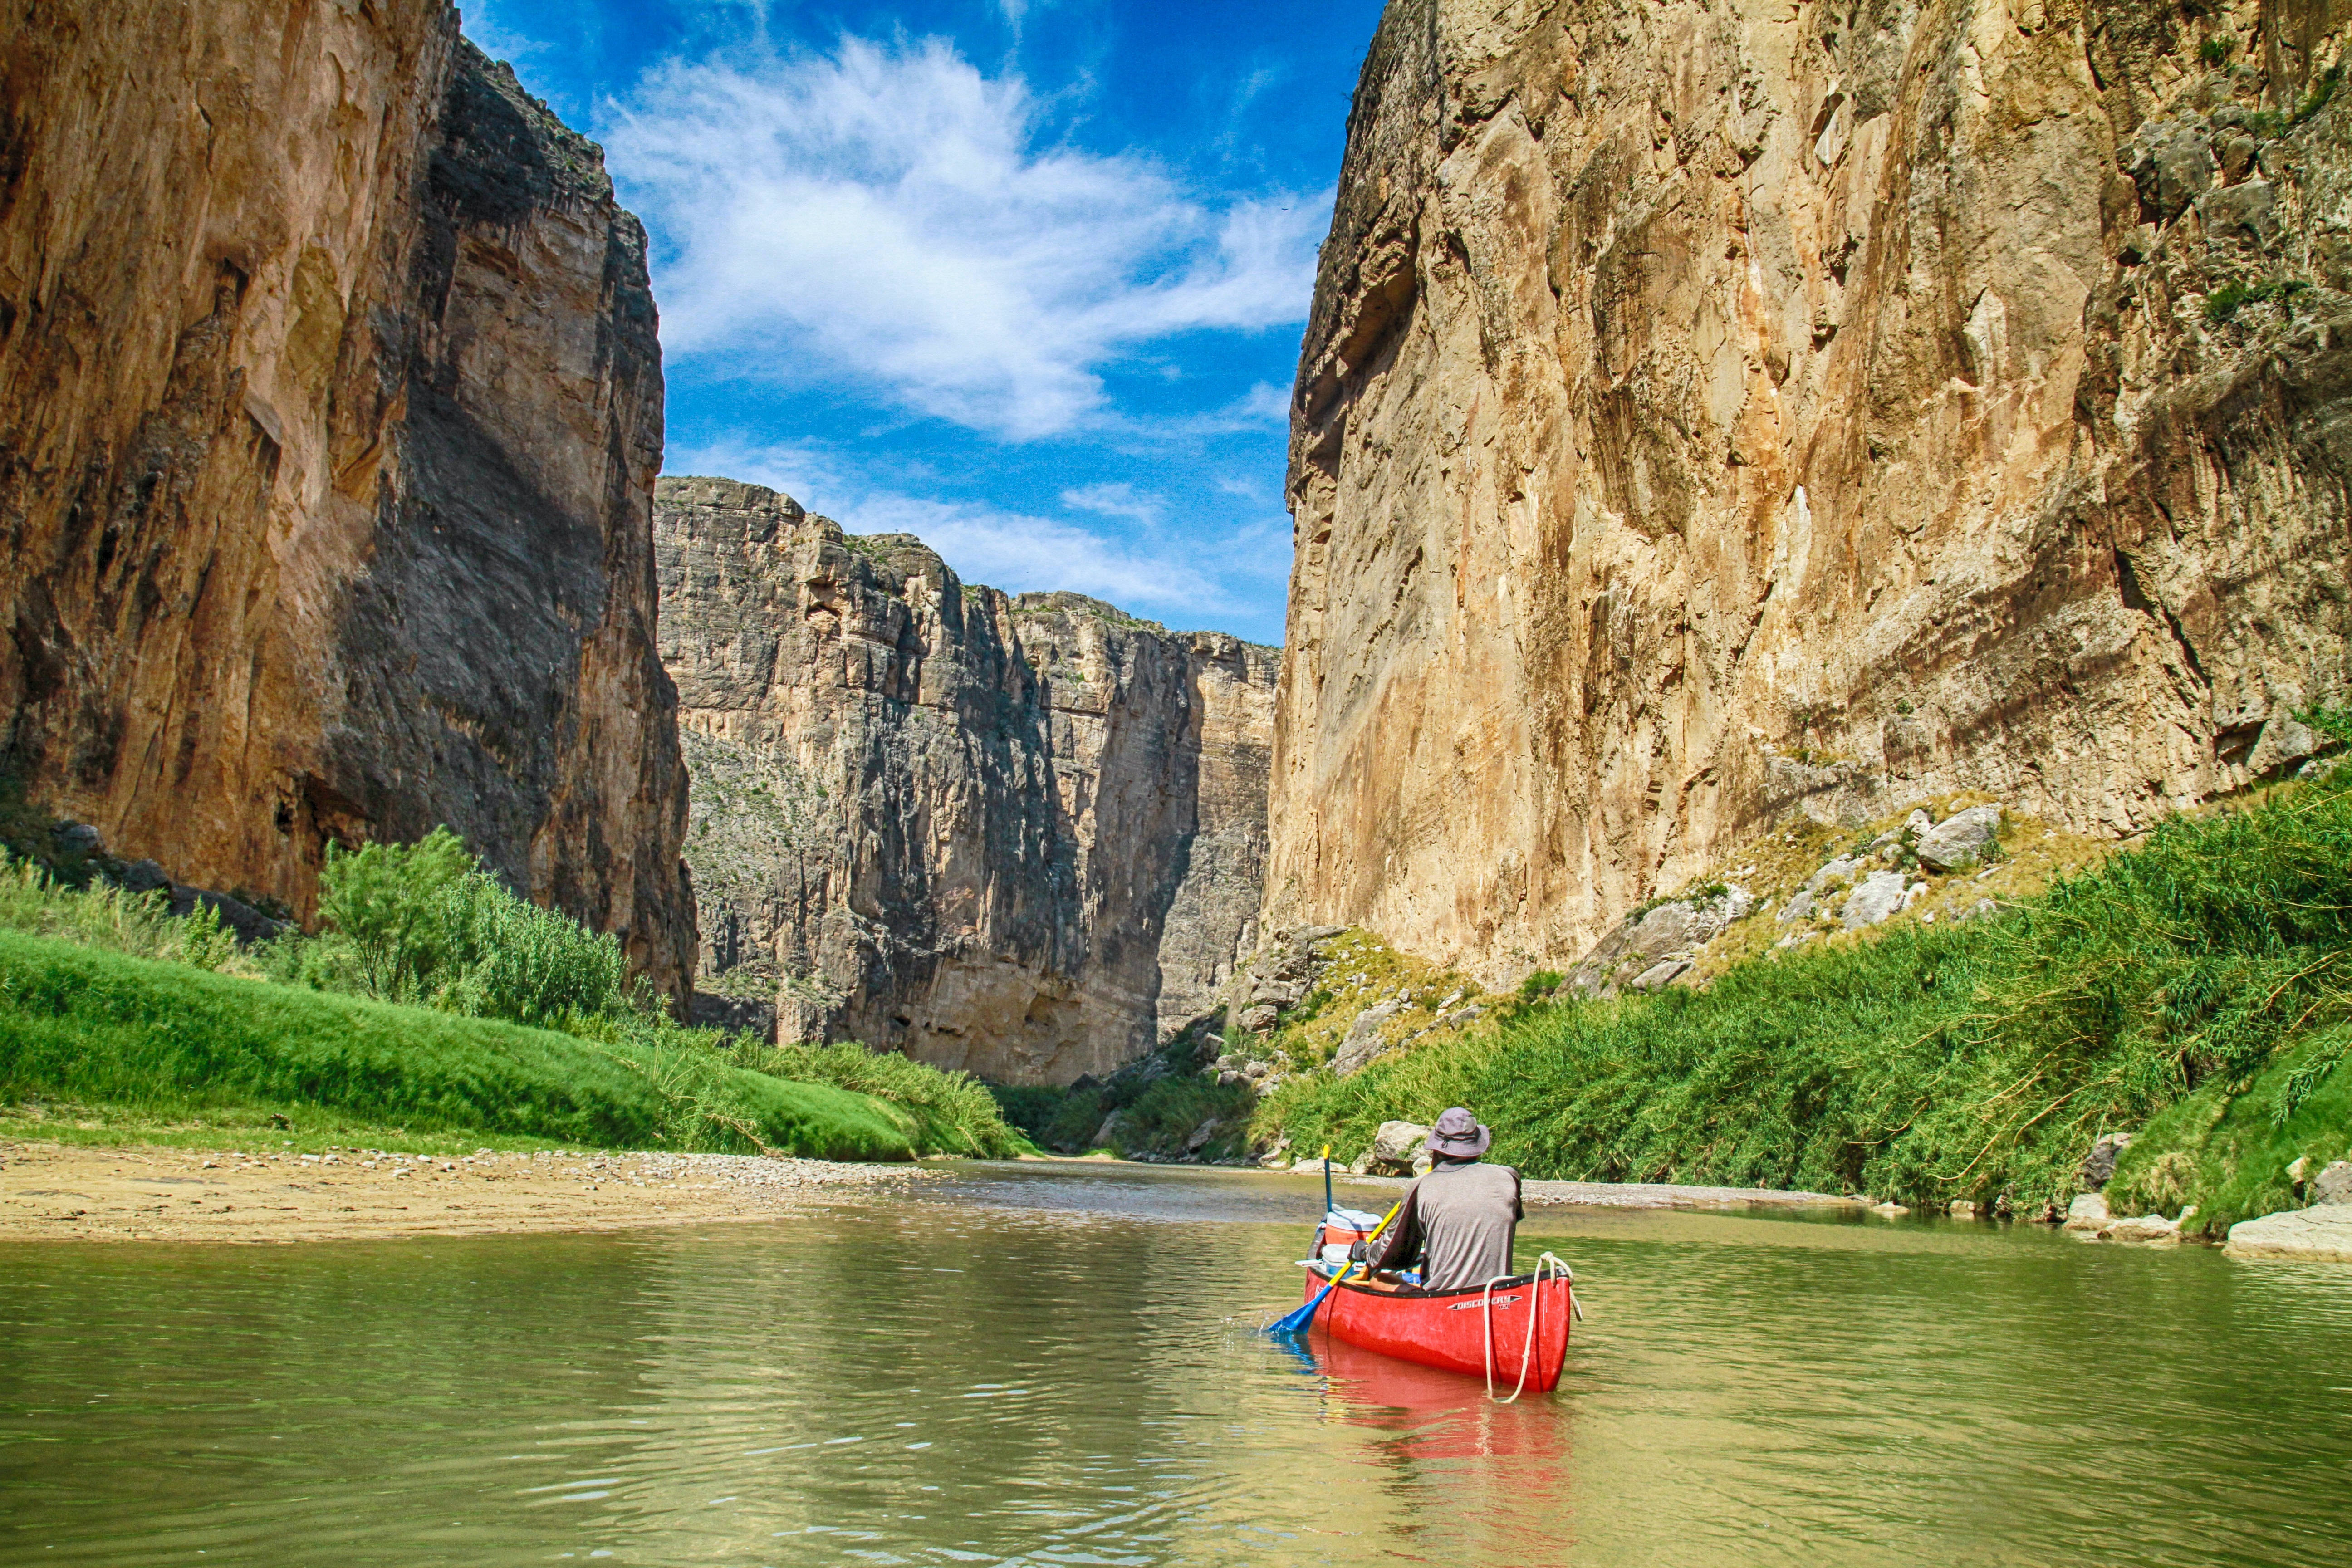 People in a canoe on a river in a canyon ready to go fishing.